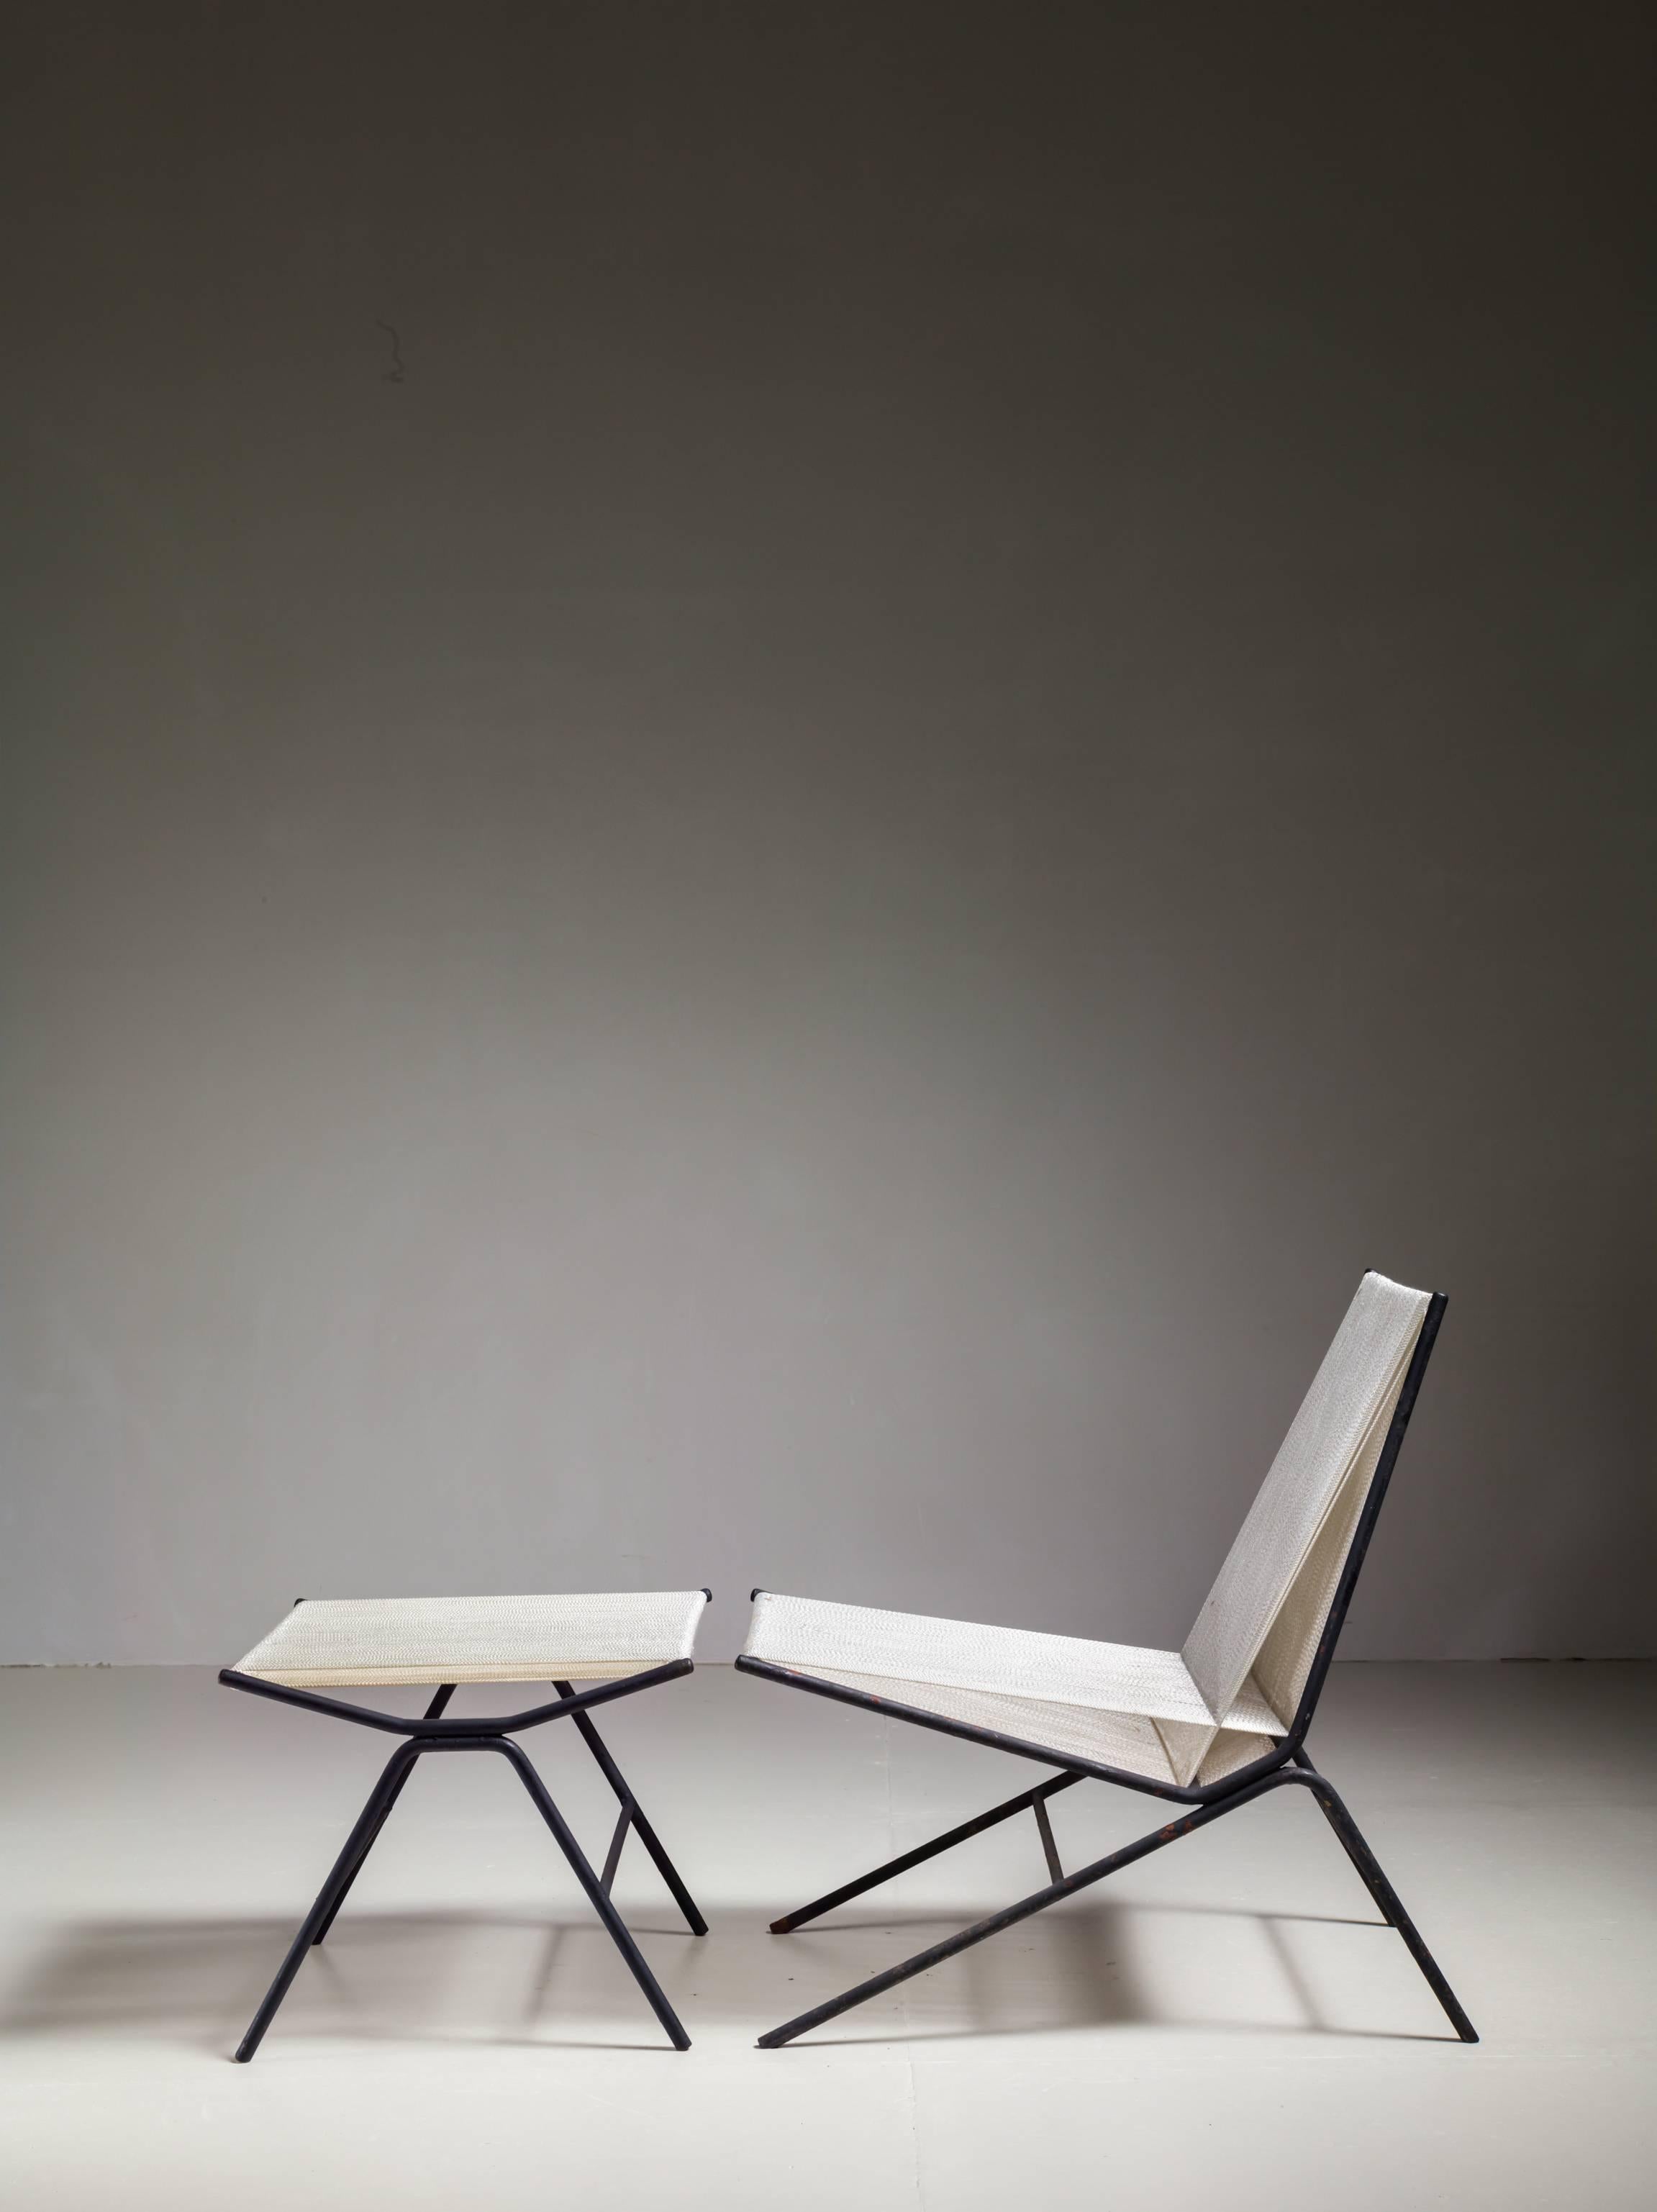 A rare Allan Gould 'bow' lounge chair with a matching ottoman or stool. Both pieces are made of an iron tube frame with a beautifully woven white rope seating.

The measurements stated are of the chair. The ottoman is 51 cm (20